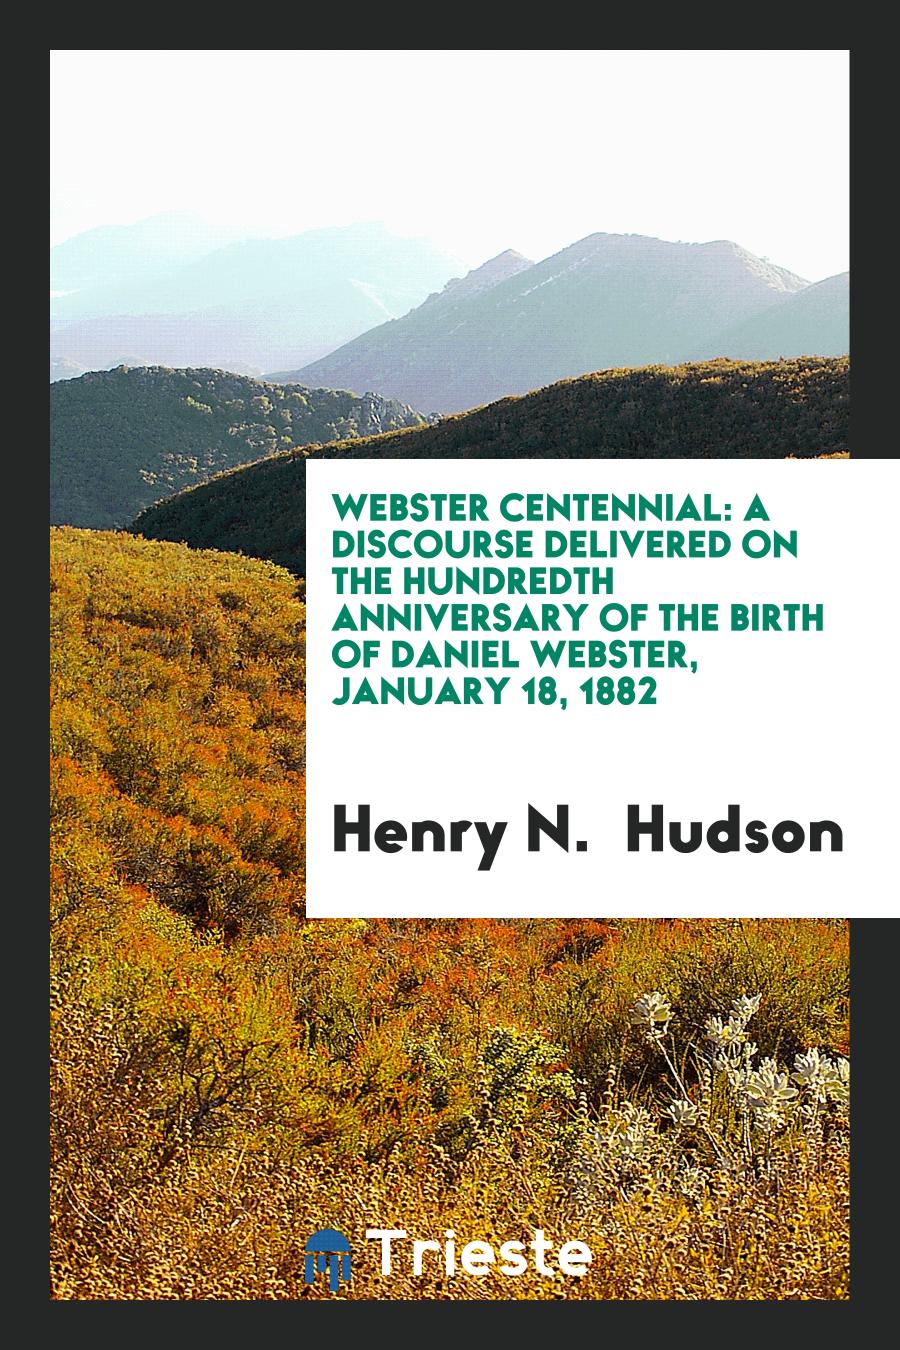 Webster Centennial: A Discourse Delivered on the Hundredth Anniversary of the Birth of Daniel Webster, January 18, 1882